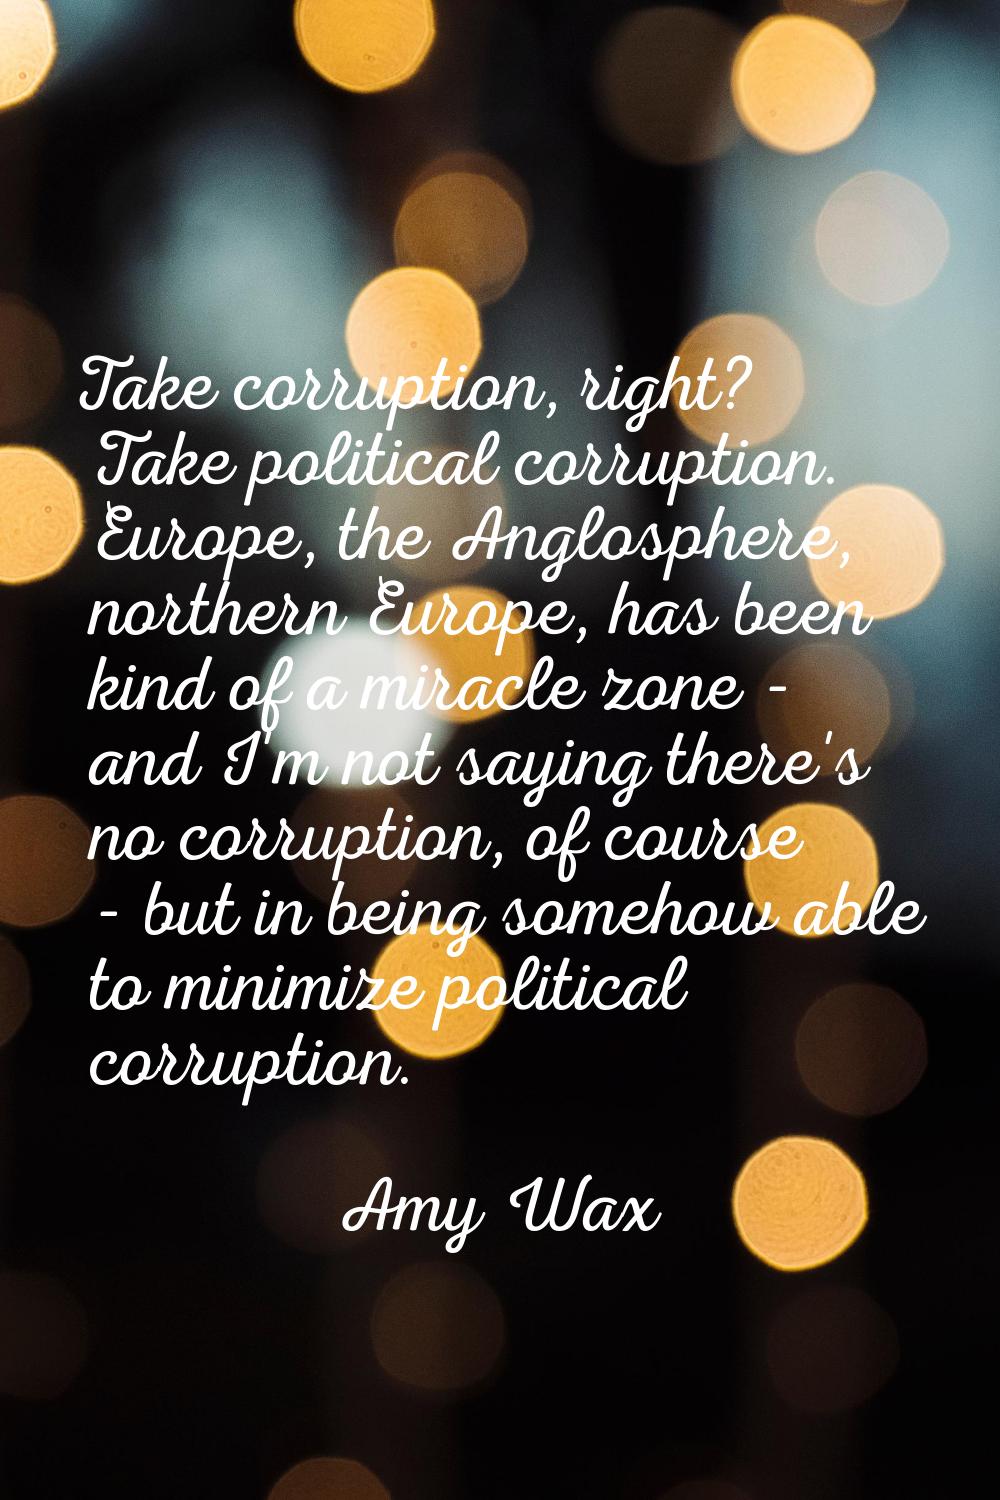 Take corruption, right? Take political corruption. Europe, the Anglosphere, northern Europe, has be